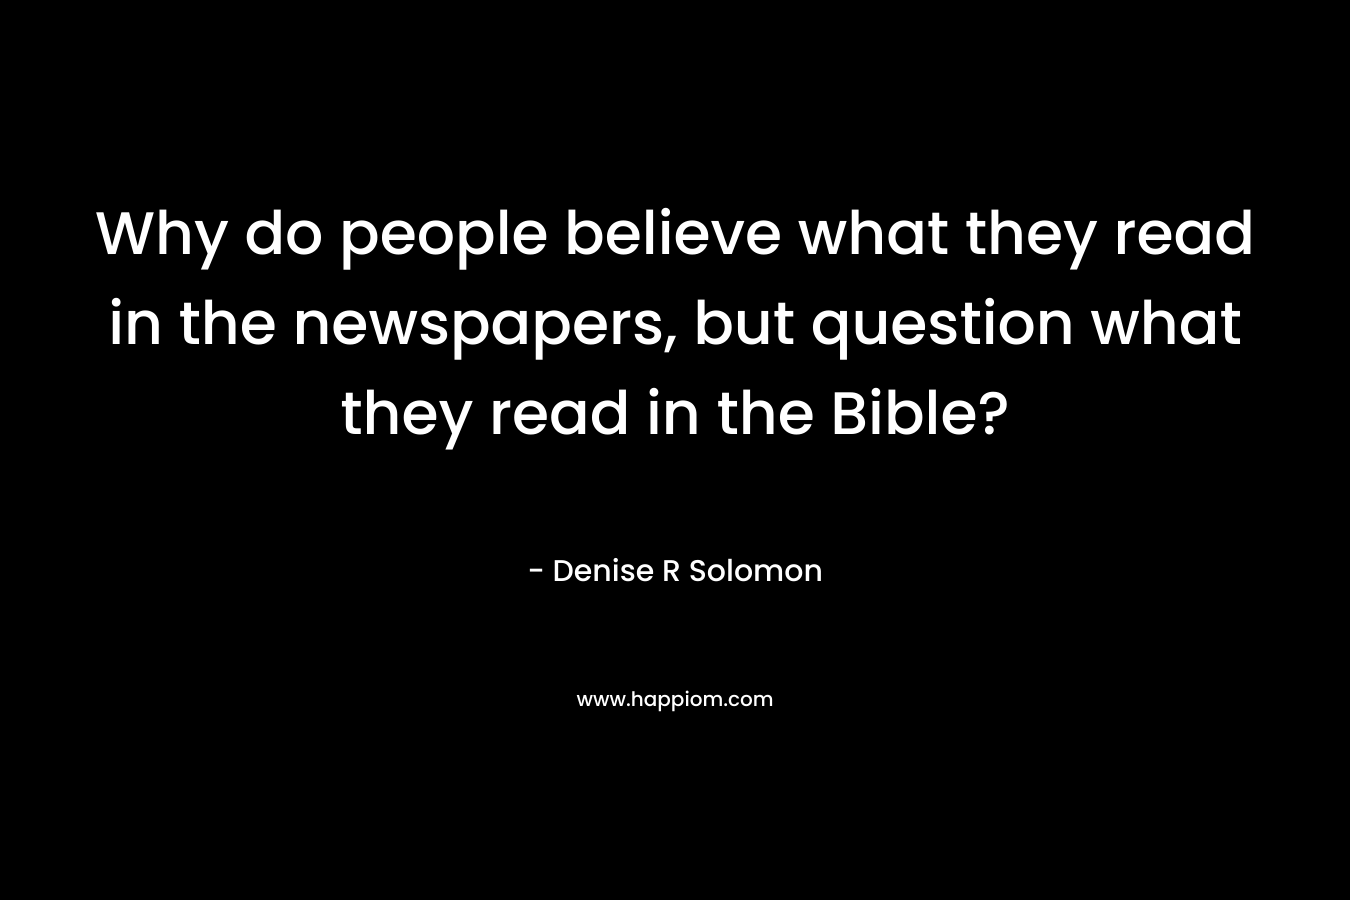 Why do people believe what they read in the newspapers, but question what they read in the Bible?